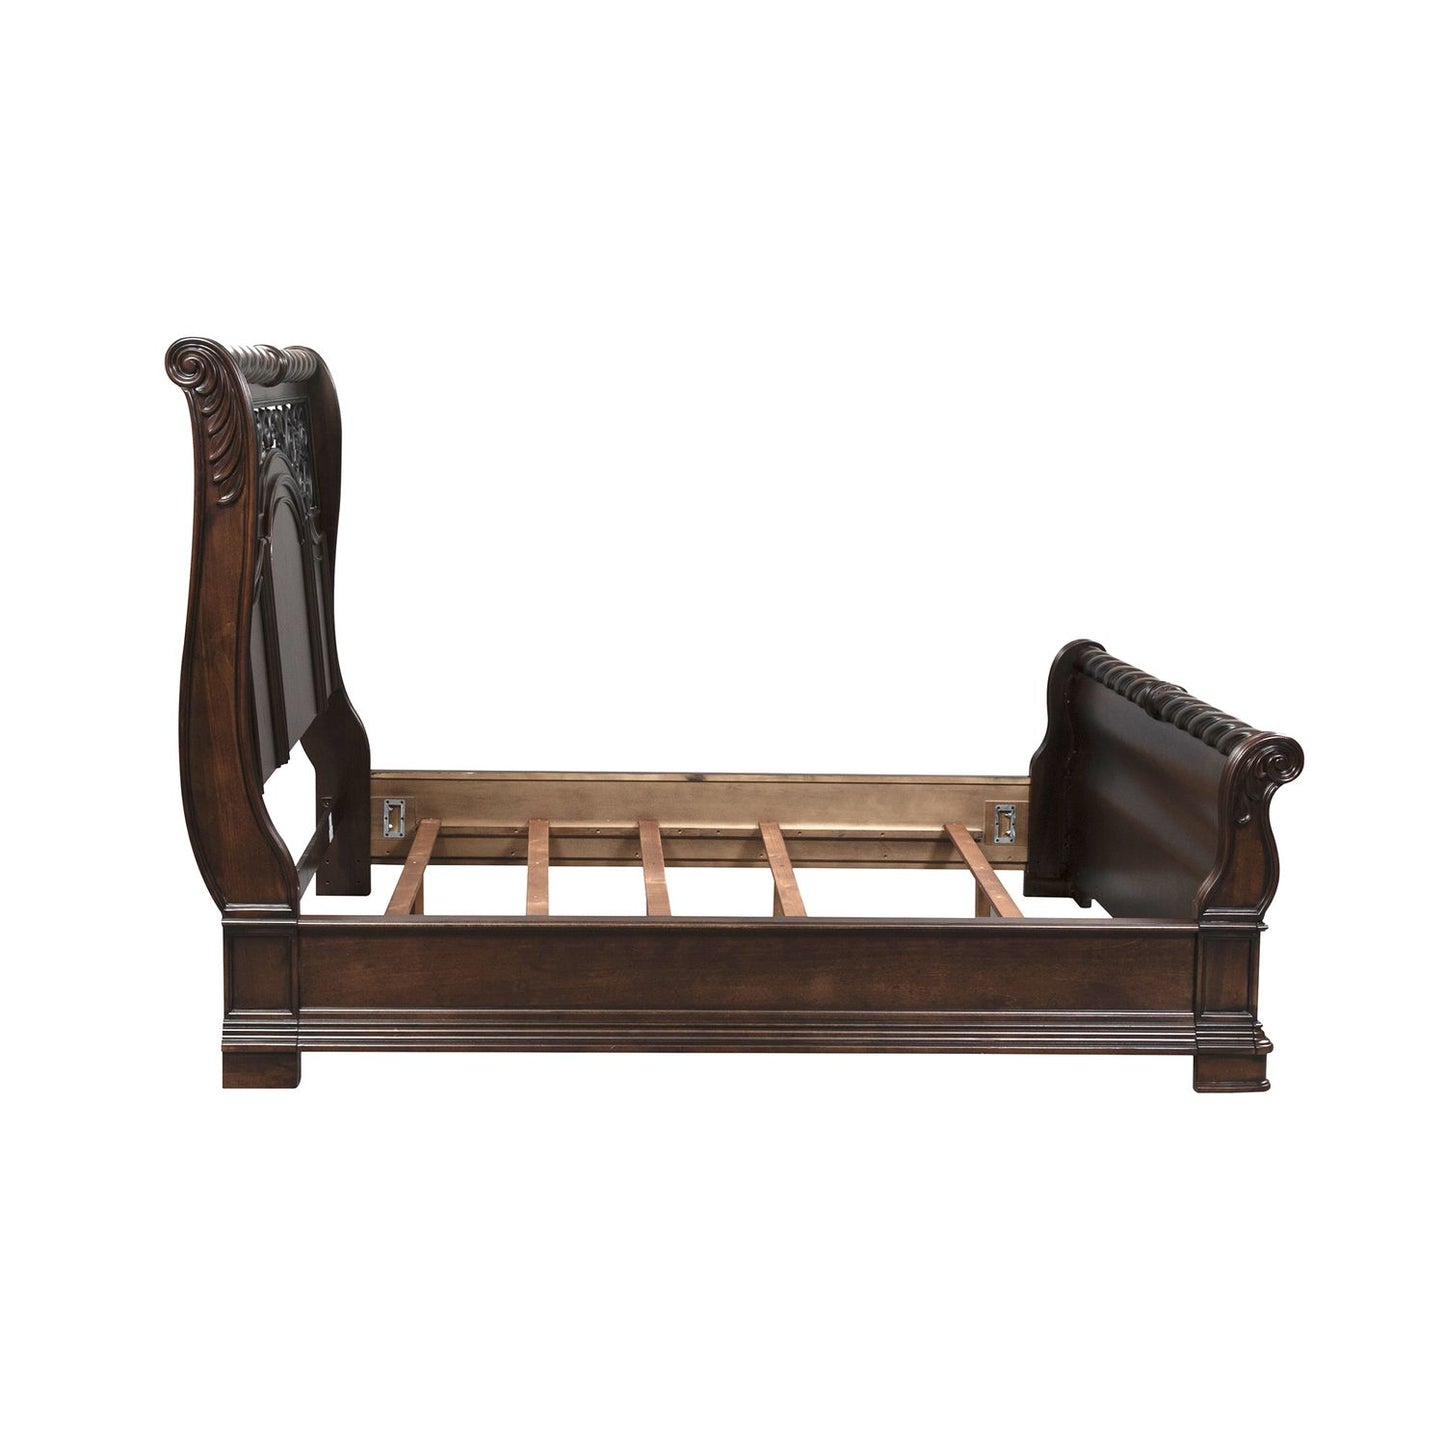 Arbor Place - King California Sleigh Bed